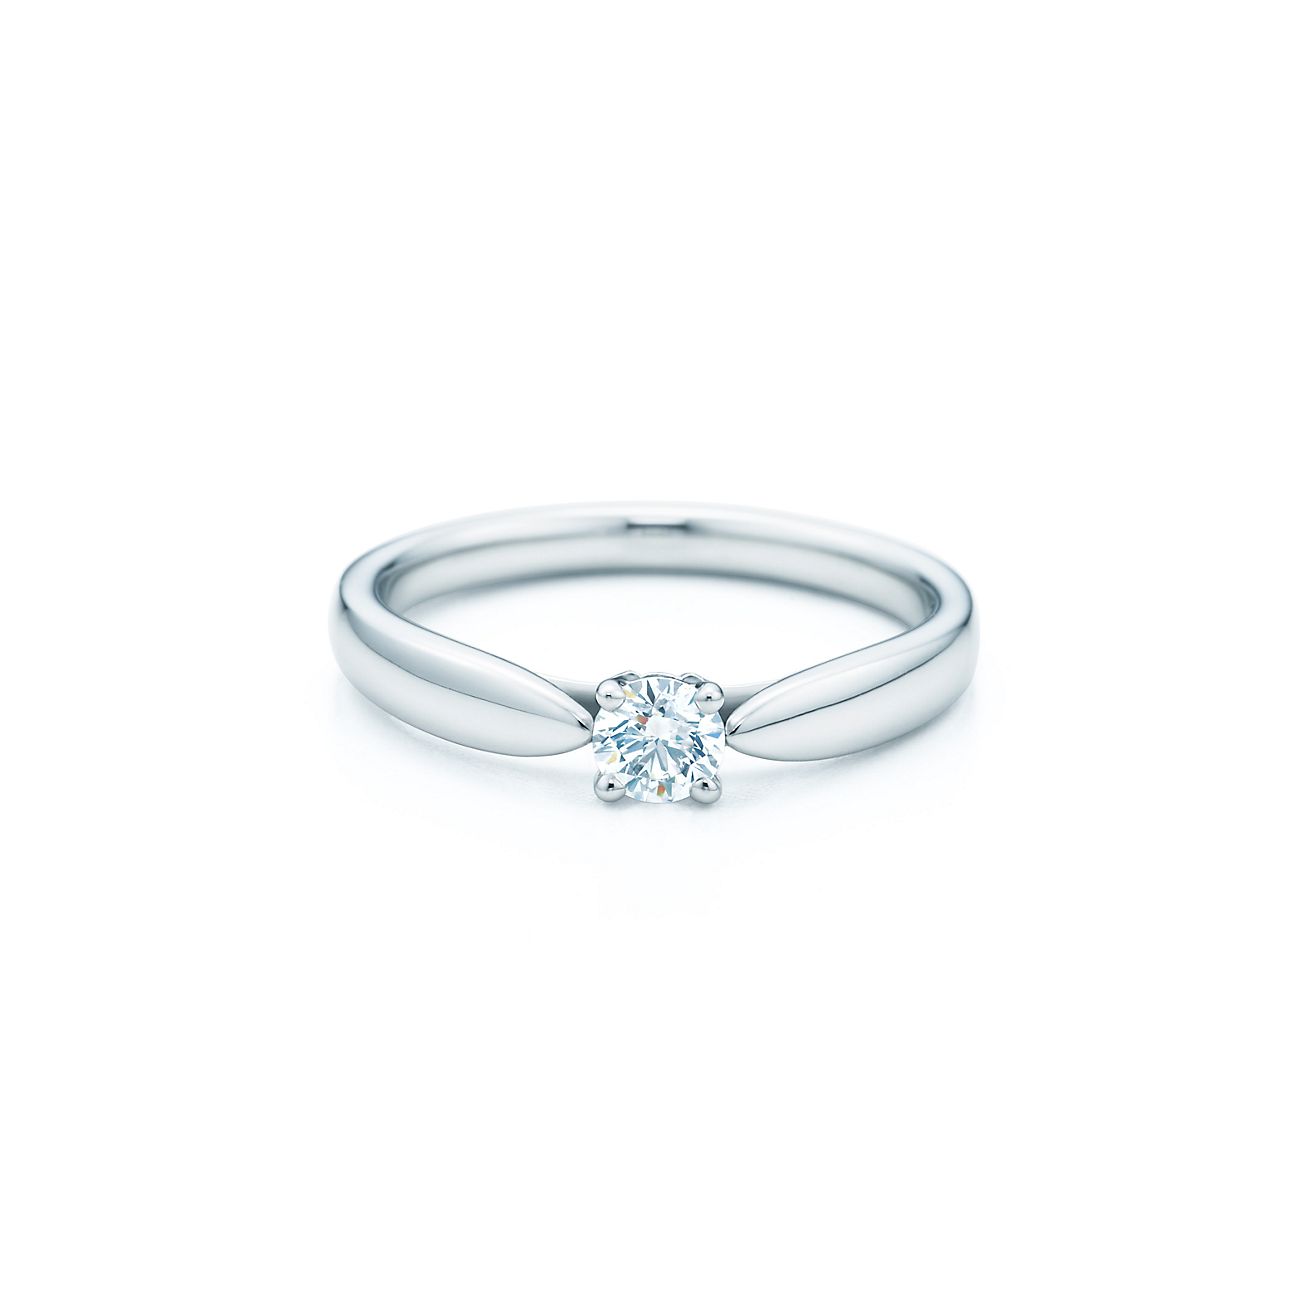 Tiffany Harmony™ ring in platinum with 